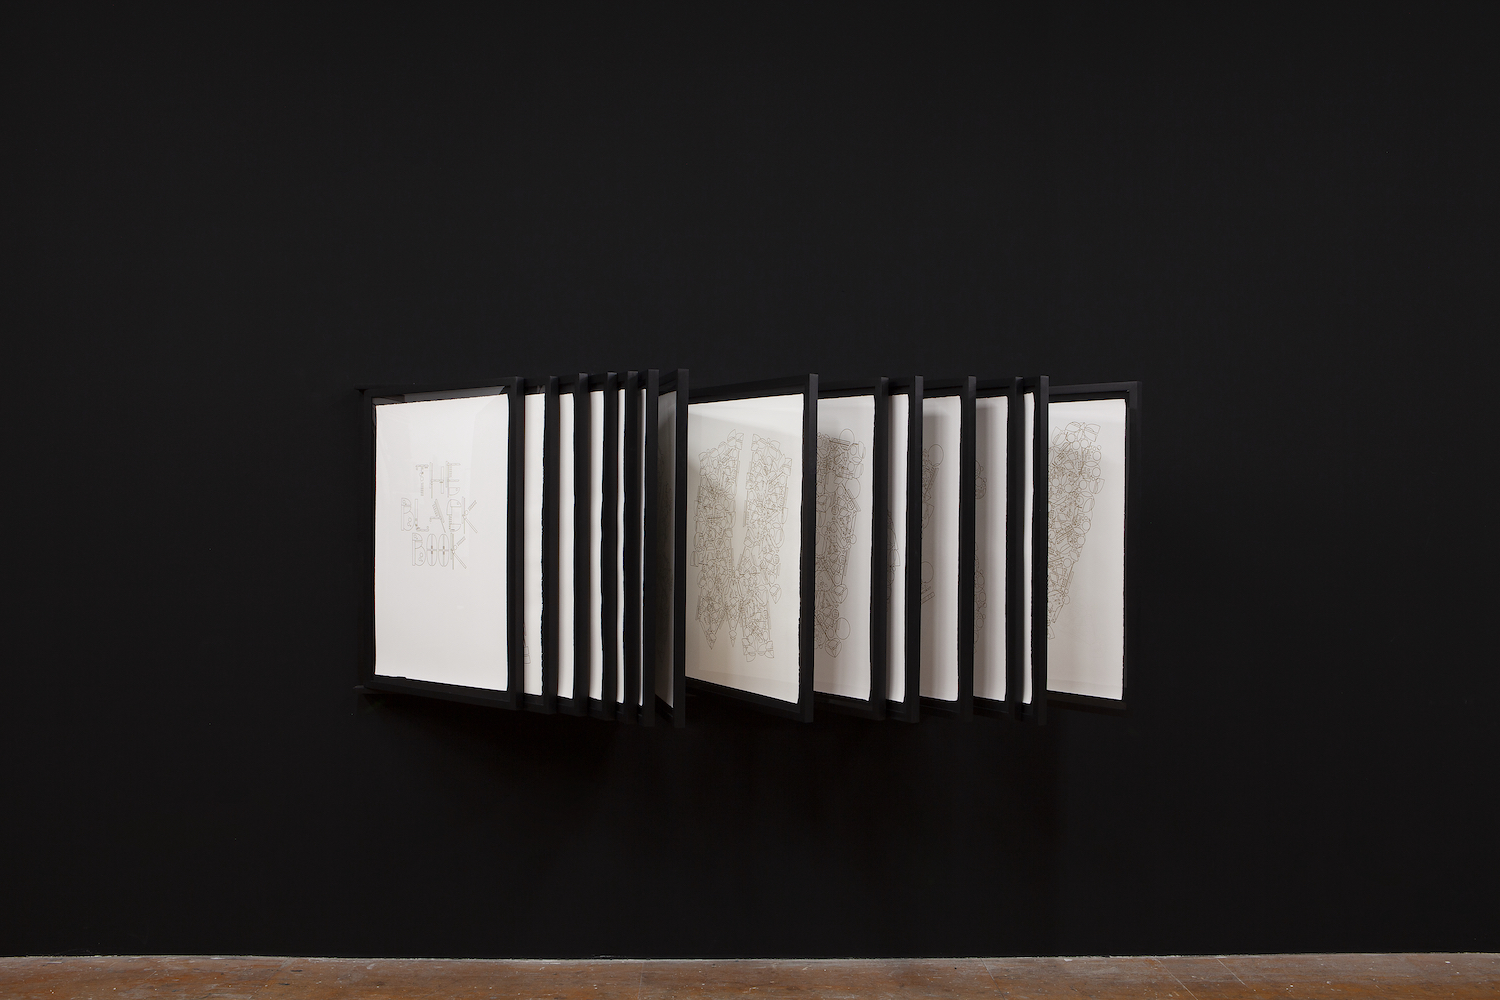 Glendalys Medina, *The Black Book*, 2019, installation view. Marker on 27 sheets of paper. 24 x 36 inches each